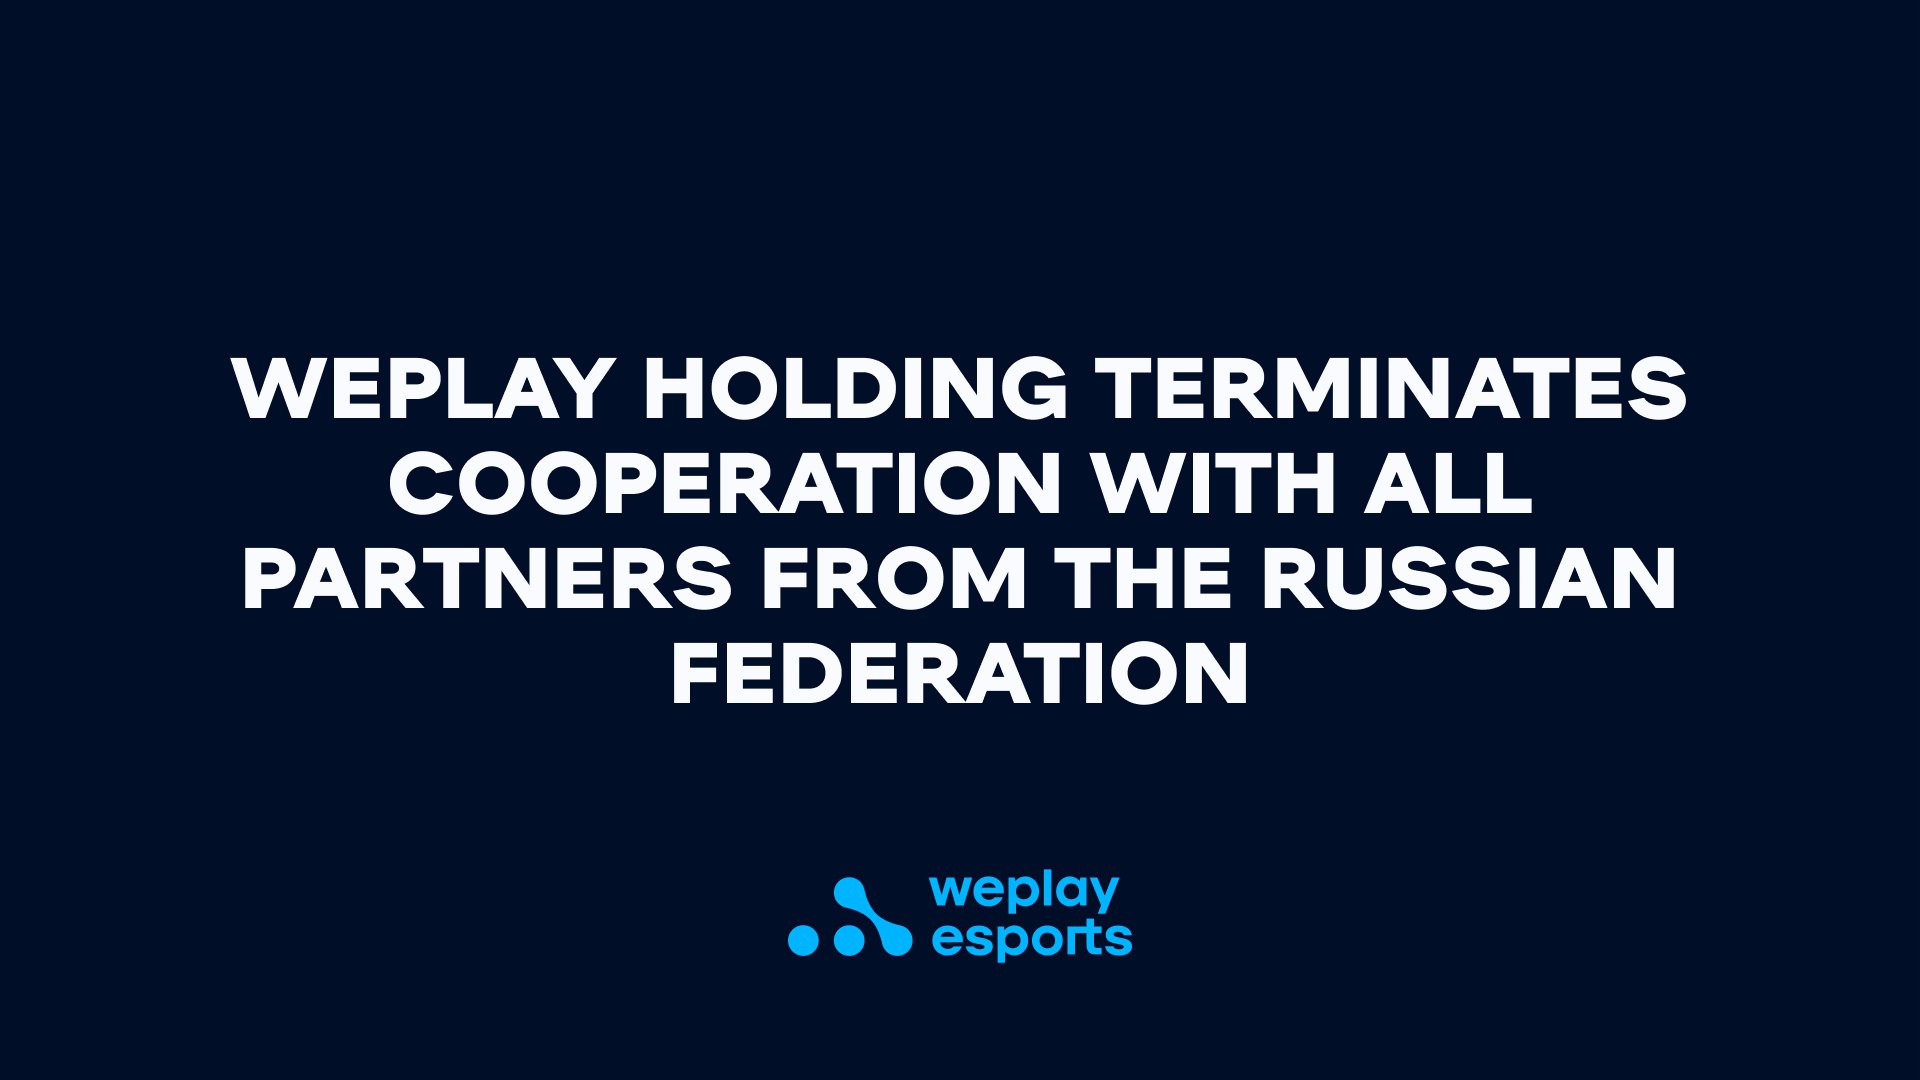 WePlay Holding terminates cooperation with all partners from the Russian Federation. Visual: WePlay Holding